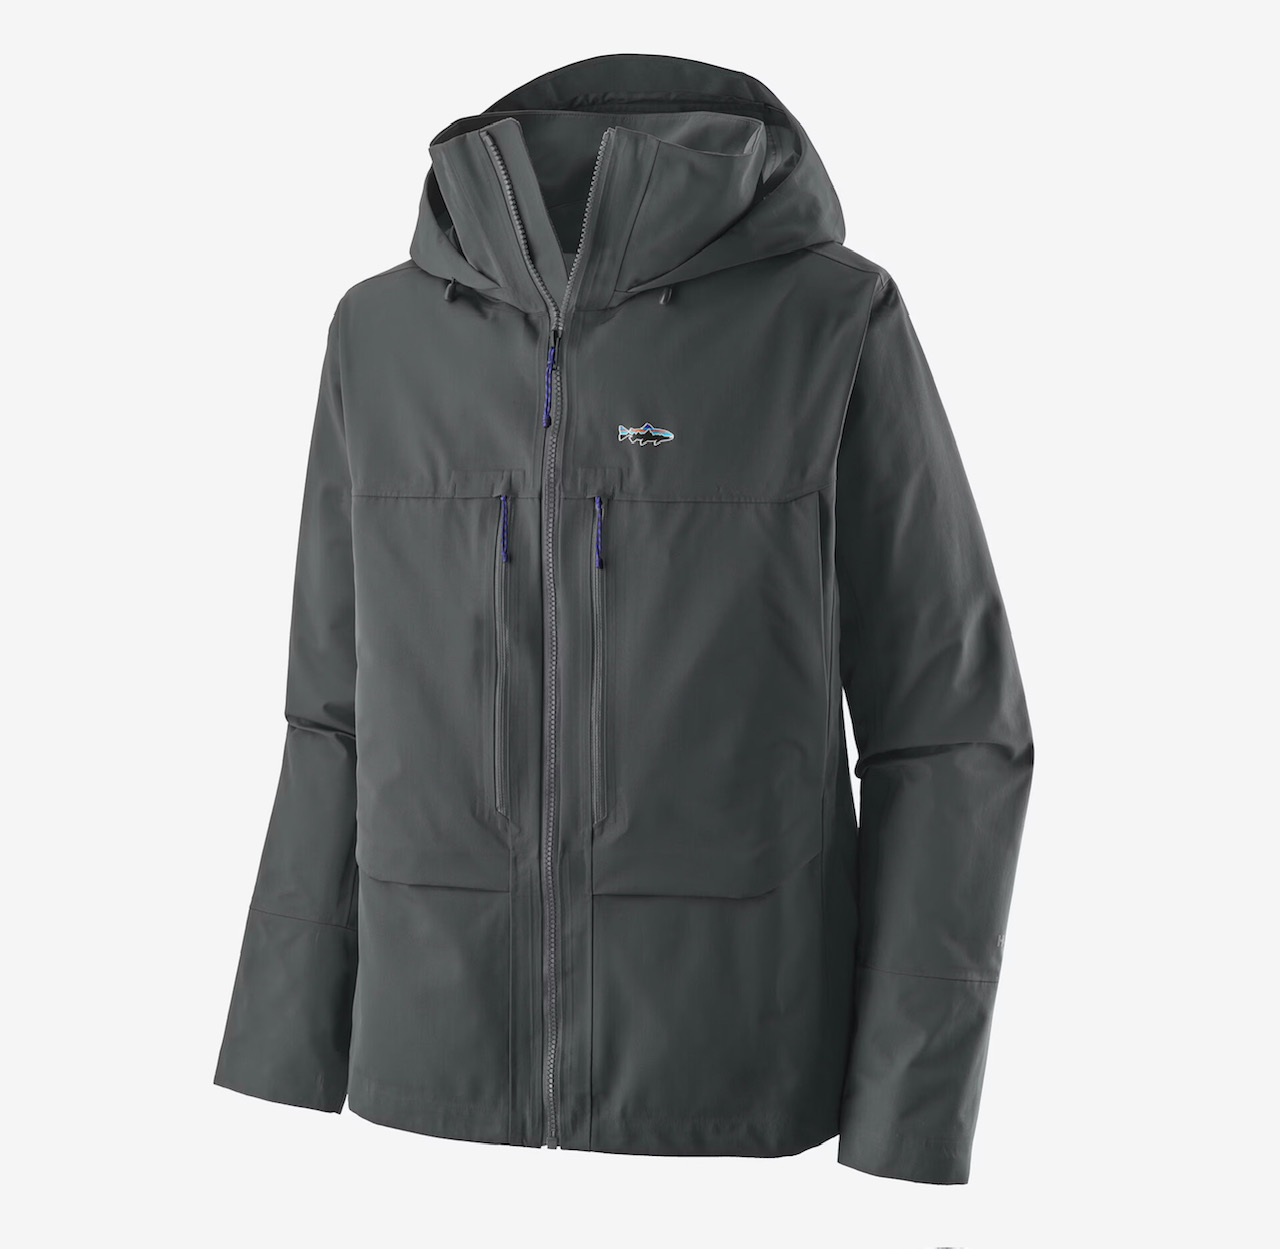 Patagonia M's Swiftcurrent Wading Jacket - Forge Grey - Small